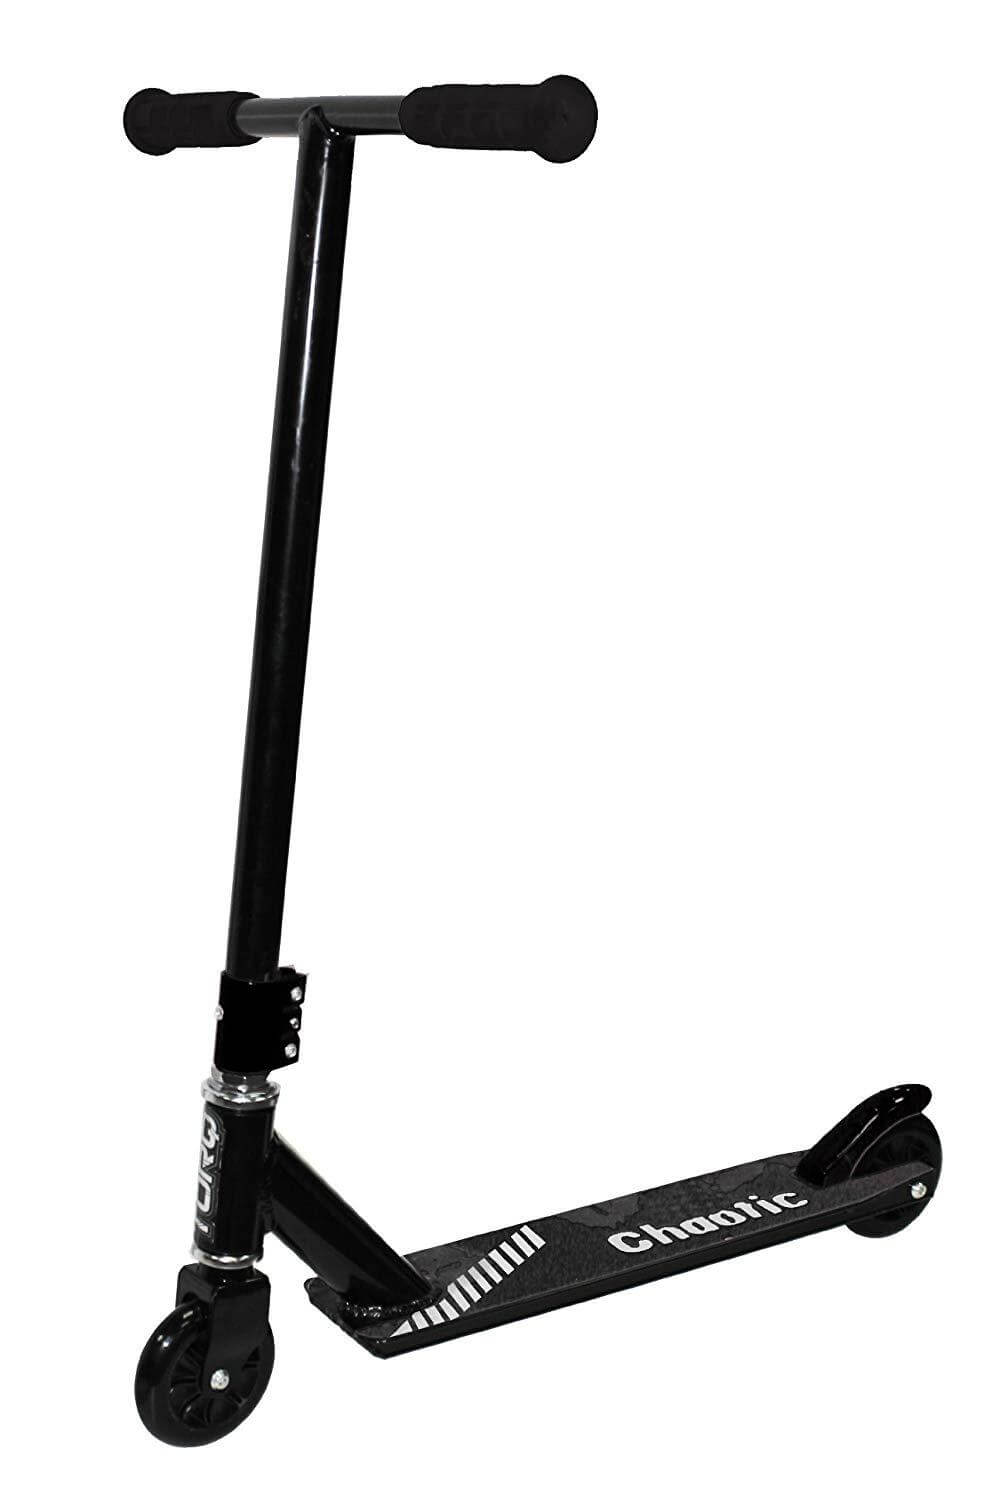 Ozbozz Torq Chaotic Scooter - Black play scooters Earthlets